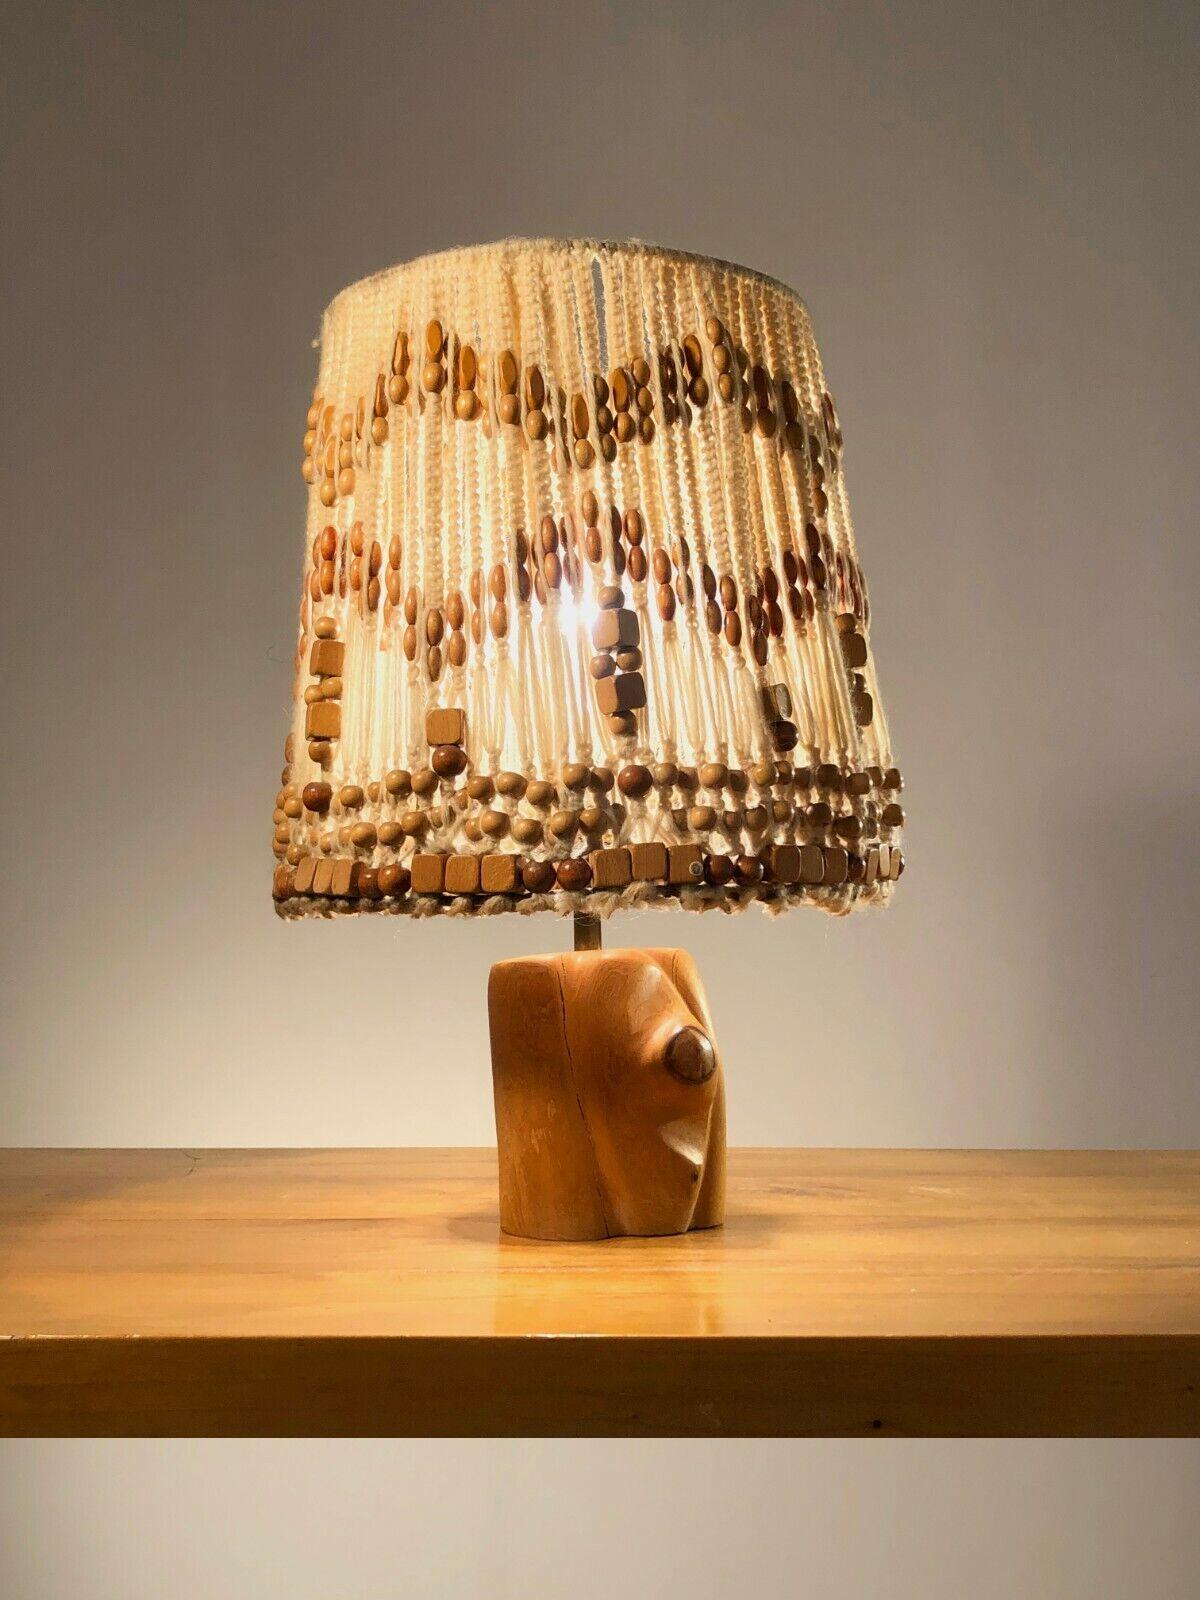 A Sculptural MID-CENTURY-MODERN BRUTALIST RUSTIC Wood TABLE LAMP,  France 1950 For Sale 7